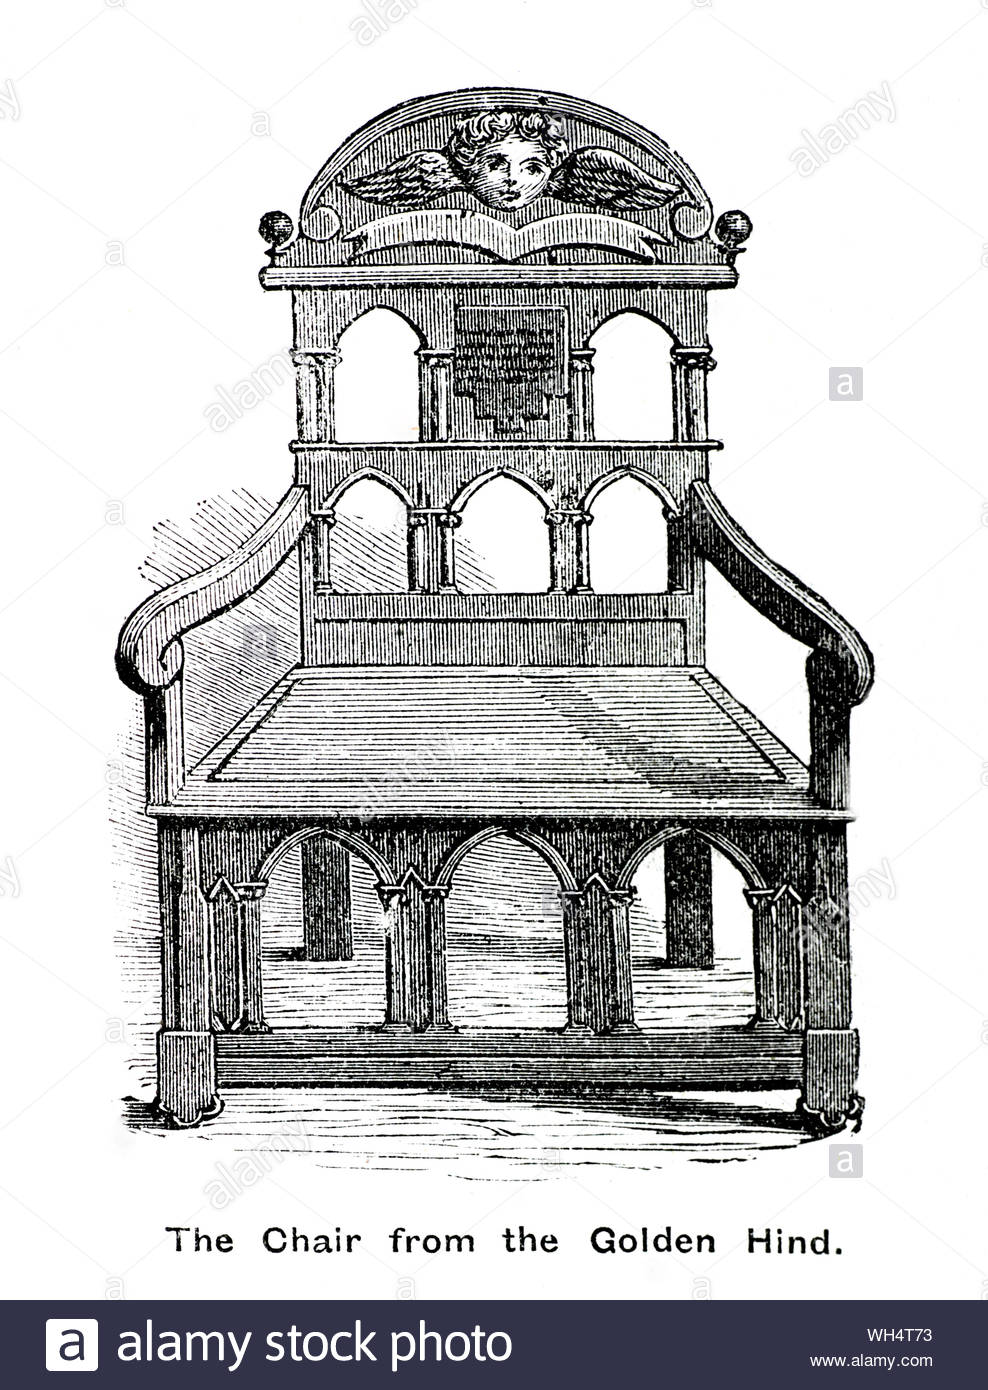 Chair made from the remnants of Sir Francis Drakes English Galleon The Golden Hind, situated in the Bodleian library University of Oxford, vintage illustration from 1884 Stock Photo